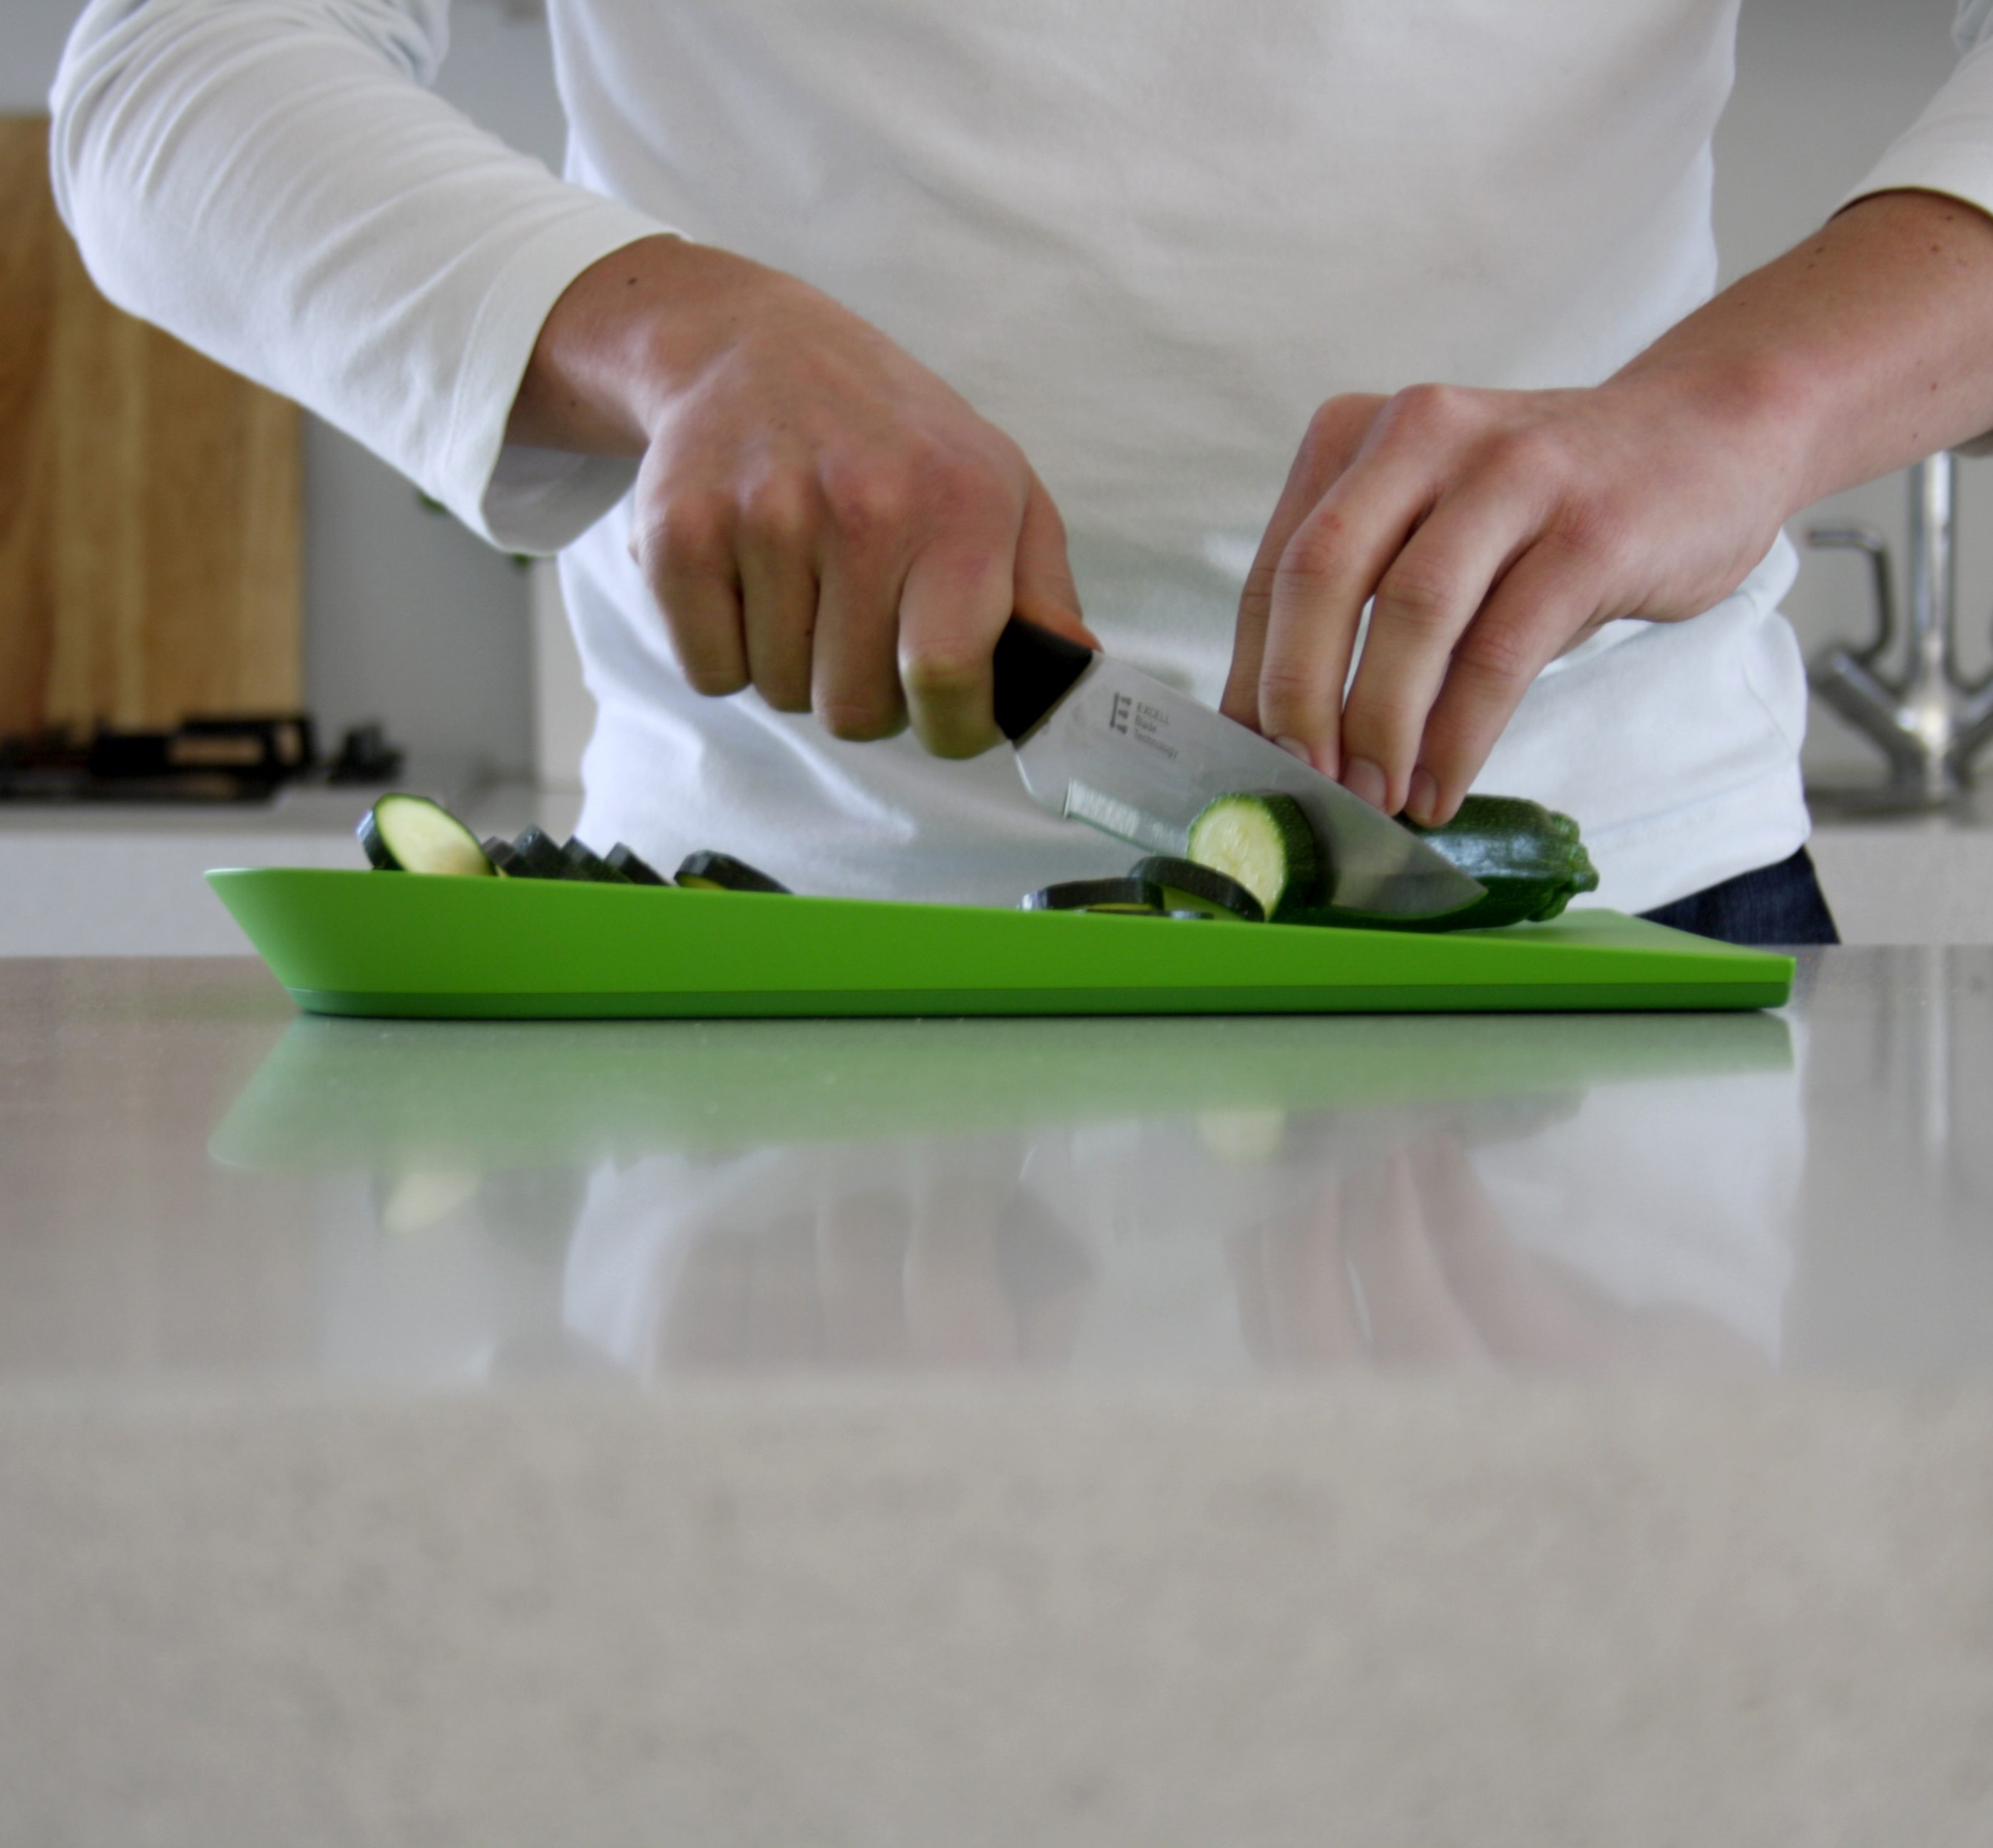 The Rodd designed Divide Equally chopping board makes portion size measurement quick and easy.